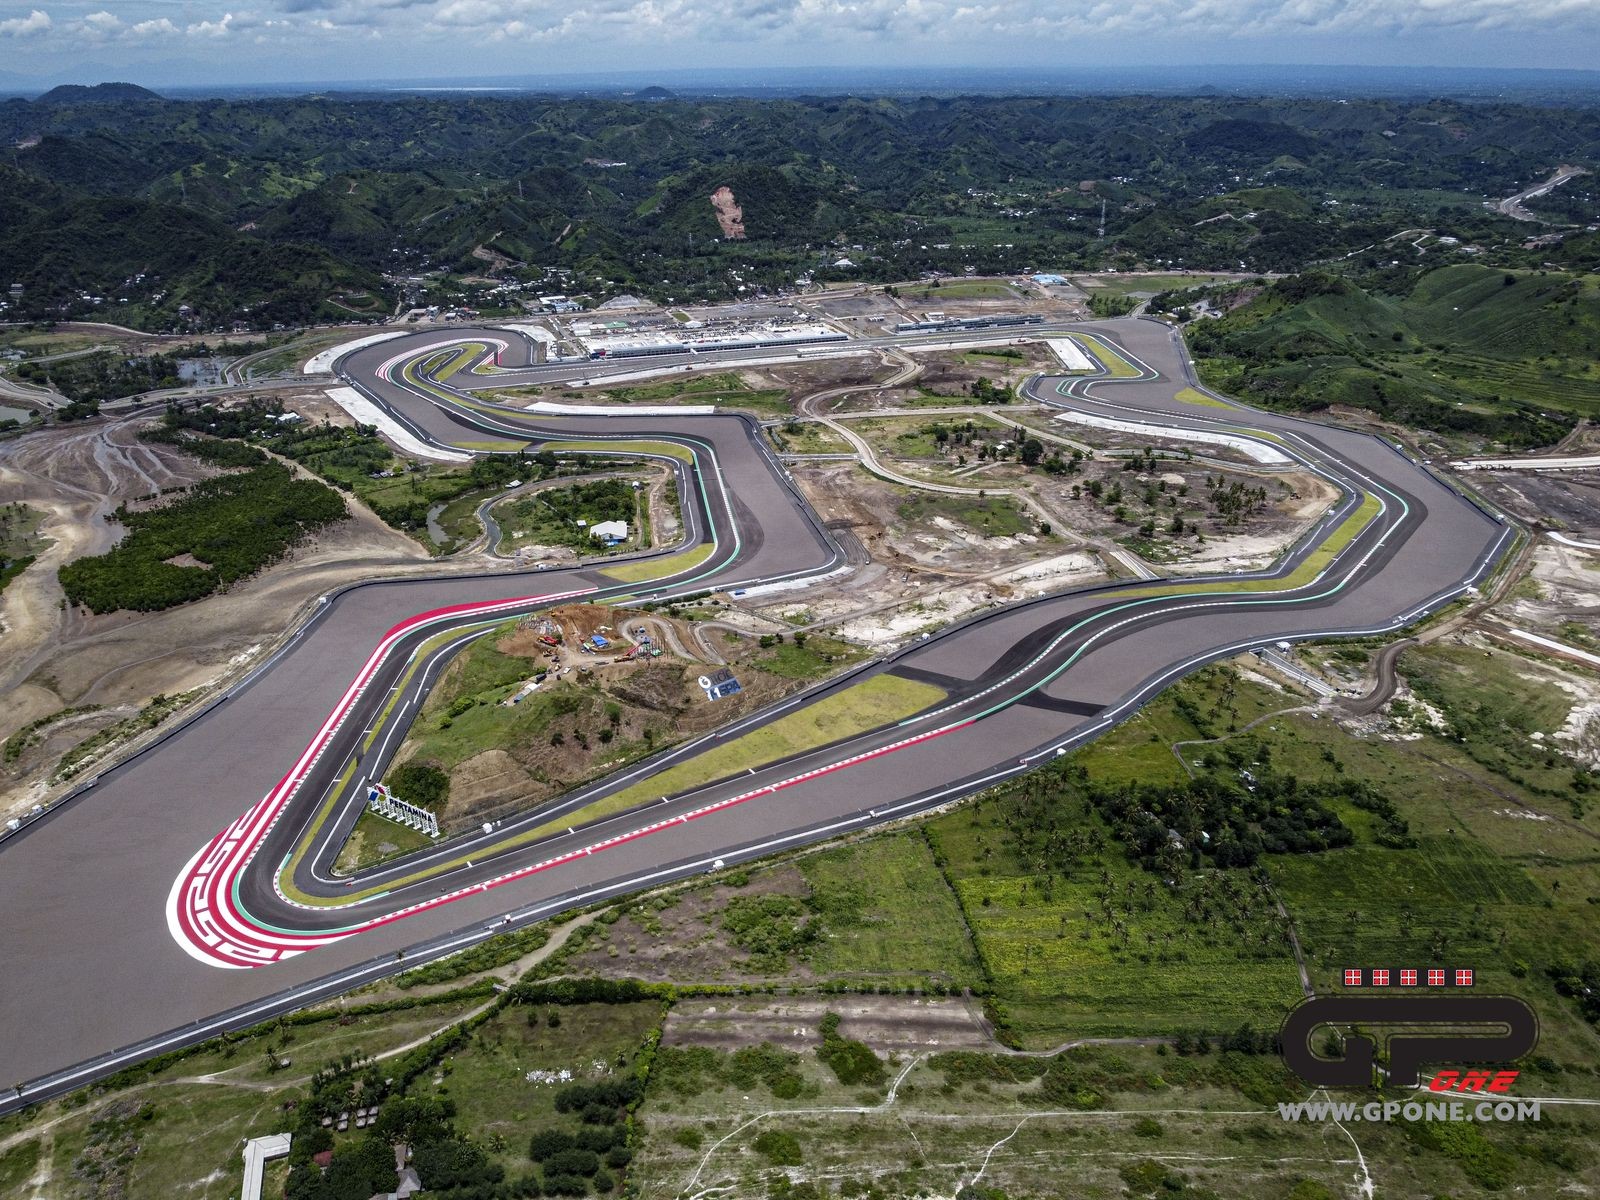 MotoGP, The Mandalika circuit seen from the sky with a drone GPone